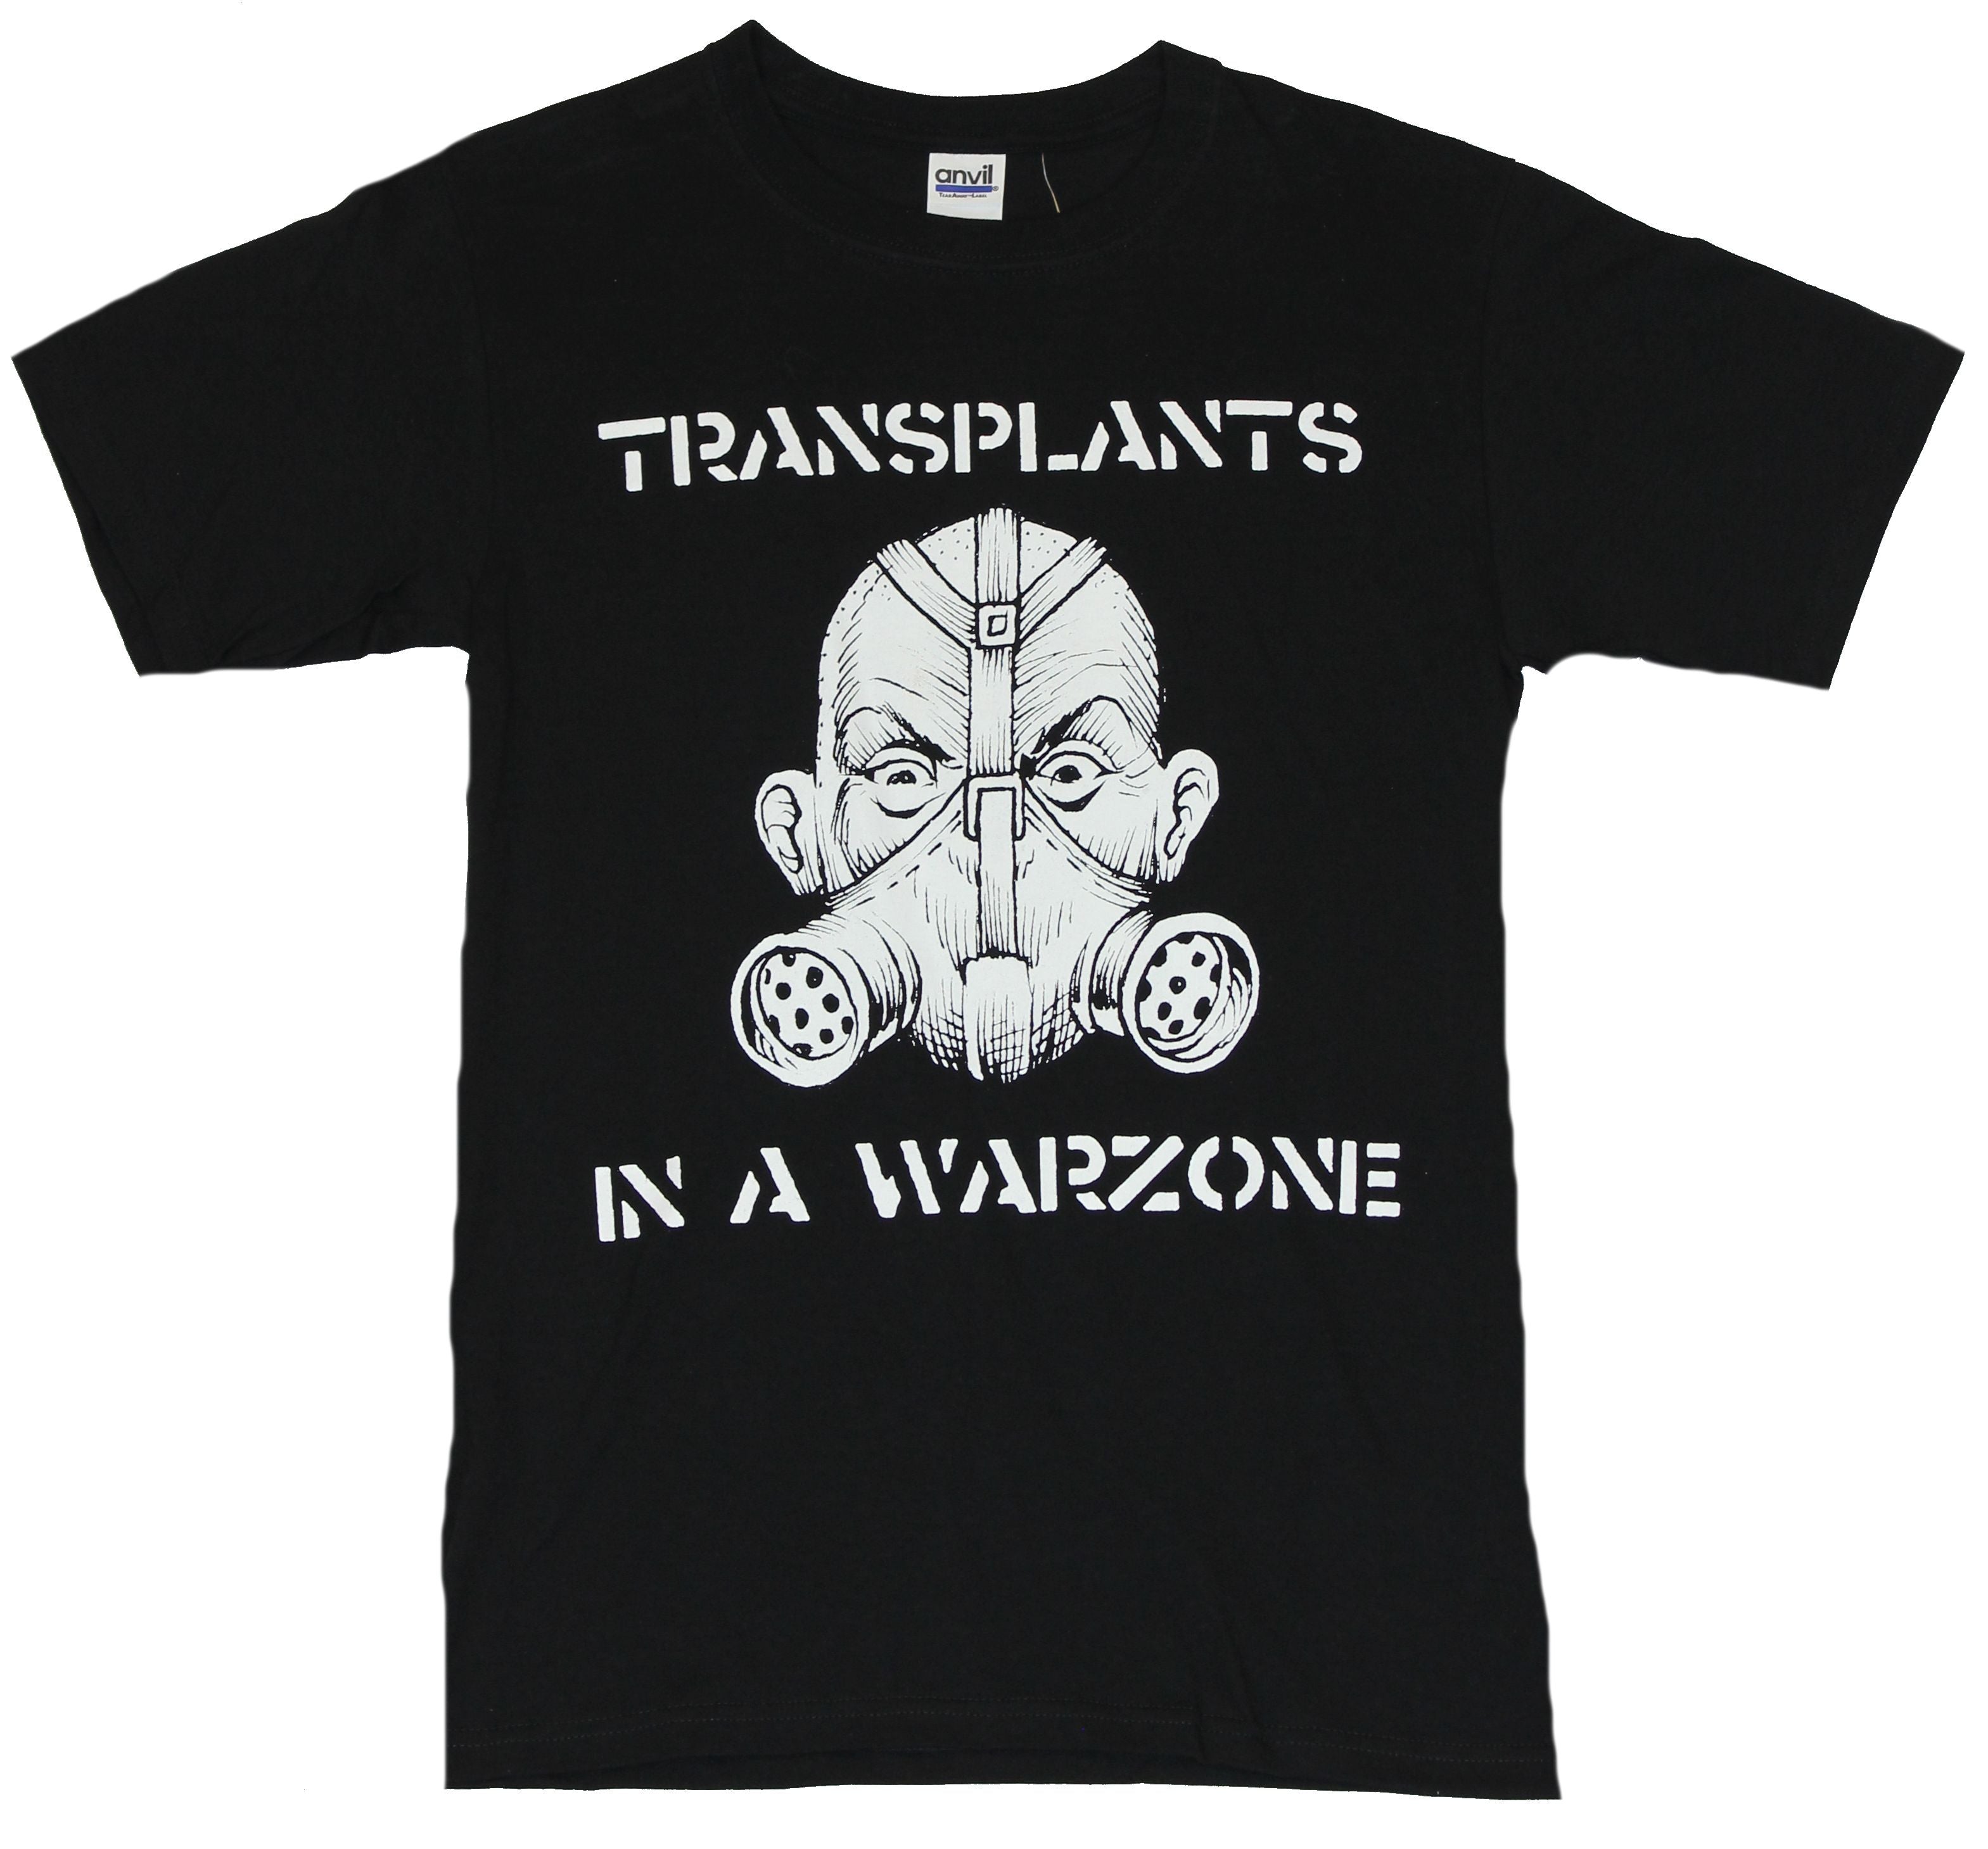 The Transplants  Mens T-Shirt -  "In A Warzone" Gas Mask Guy Image